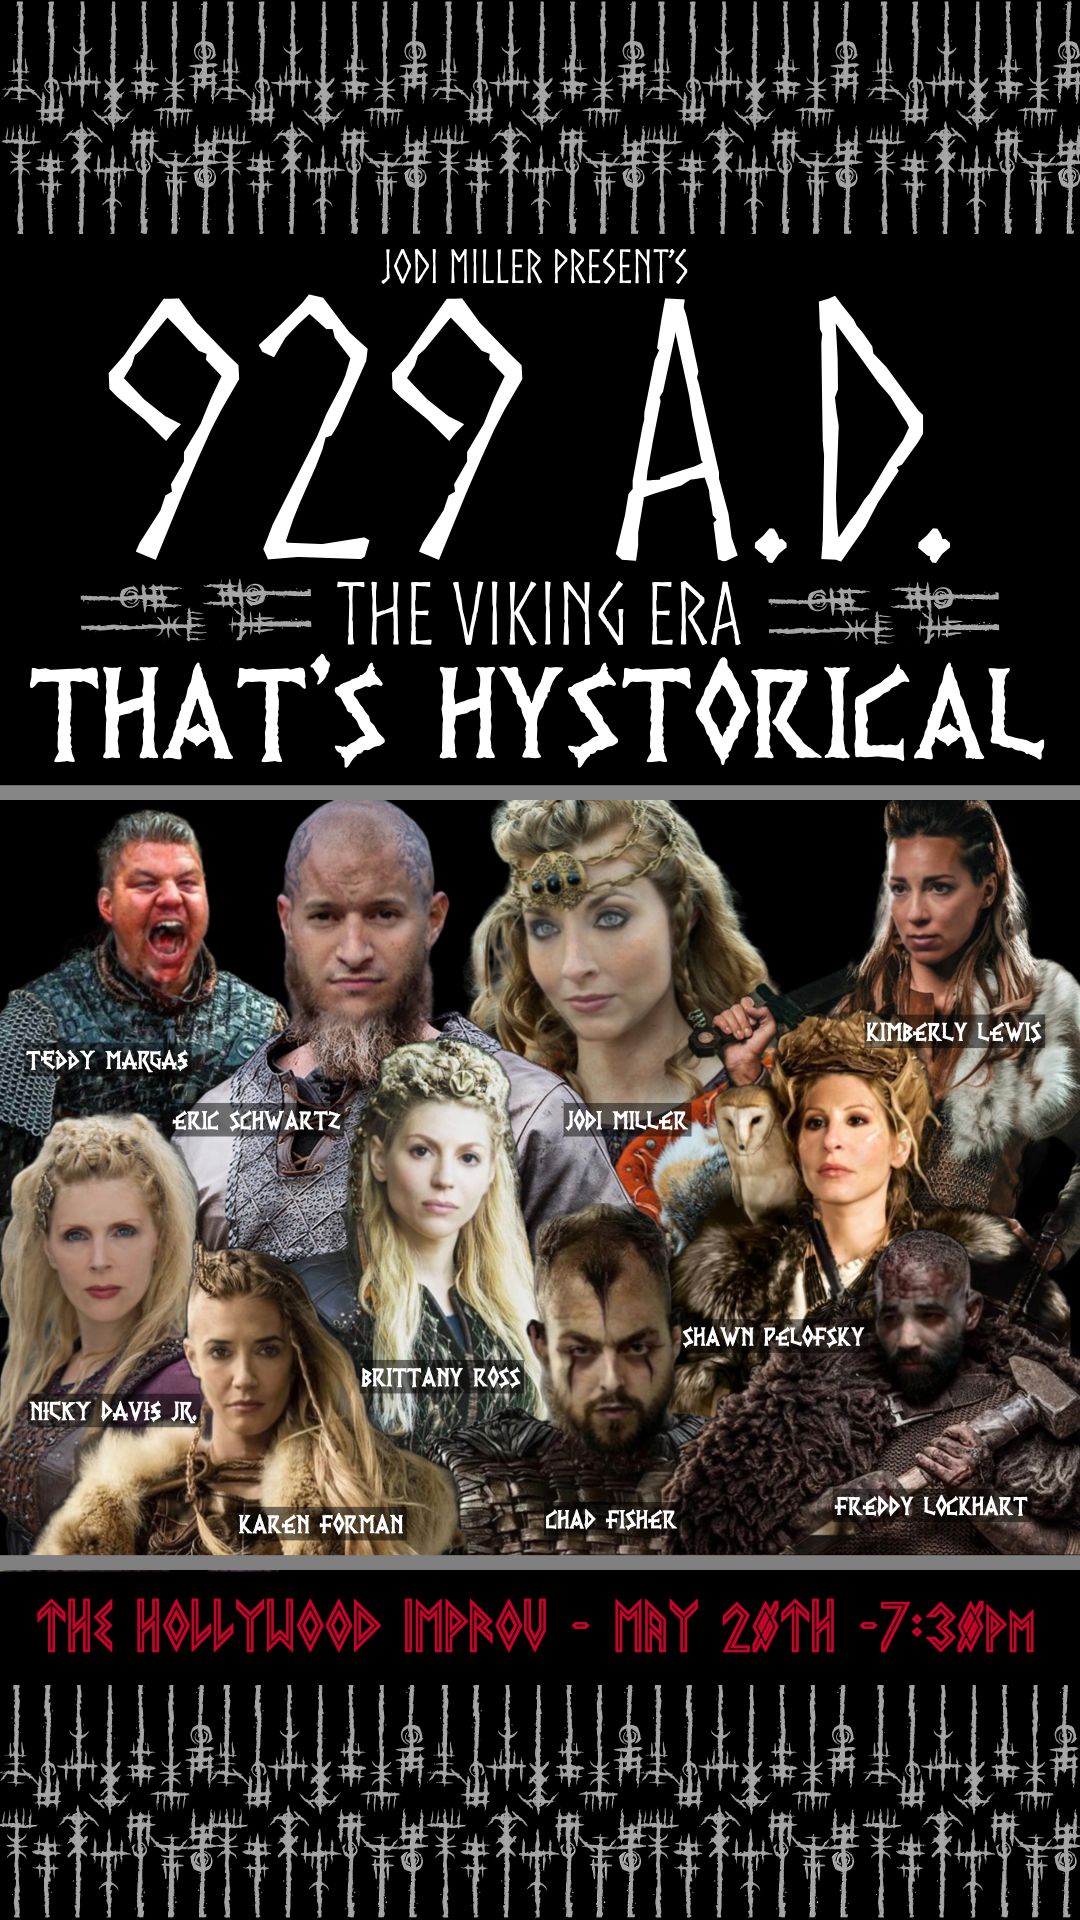 THAT'S HYSTORICAL 929 AD THE VIKING ERA